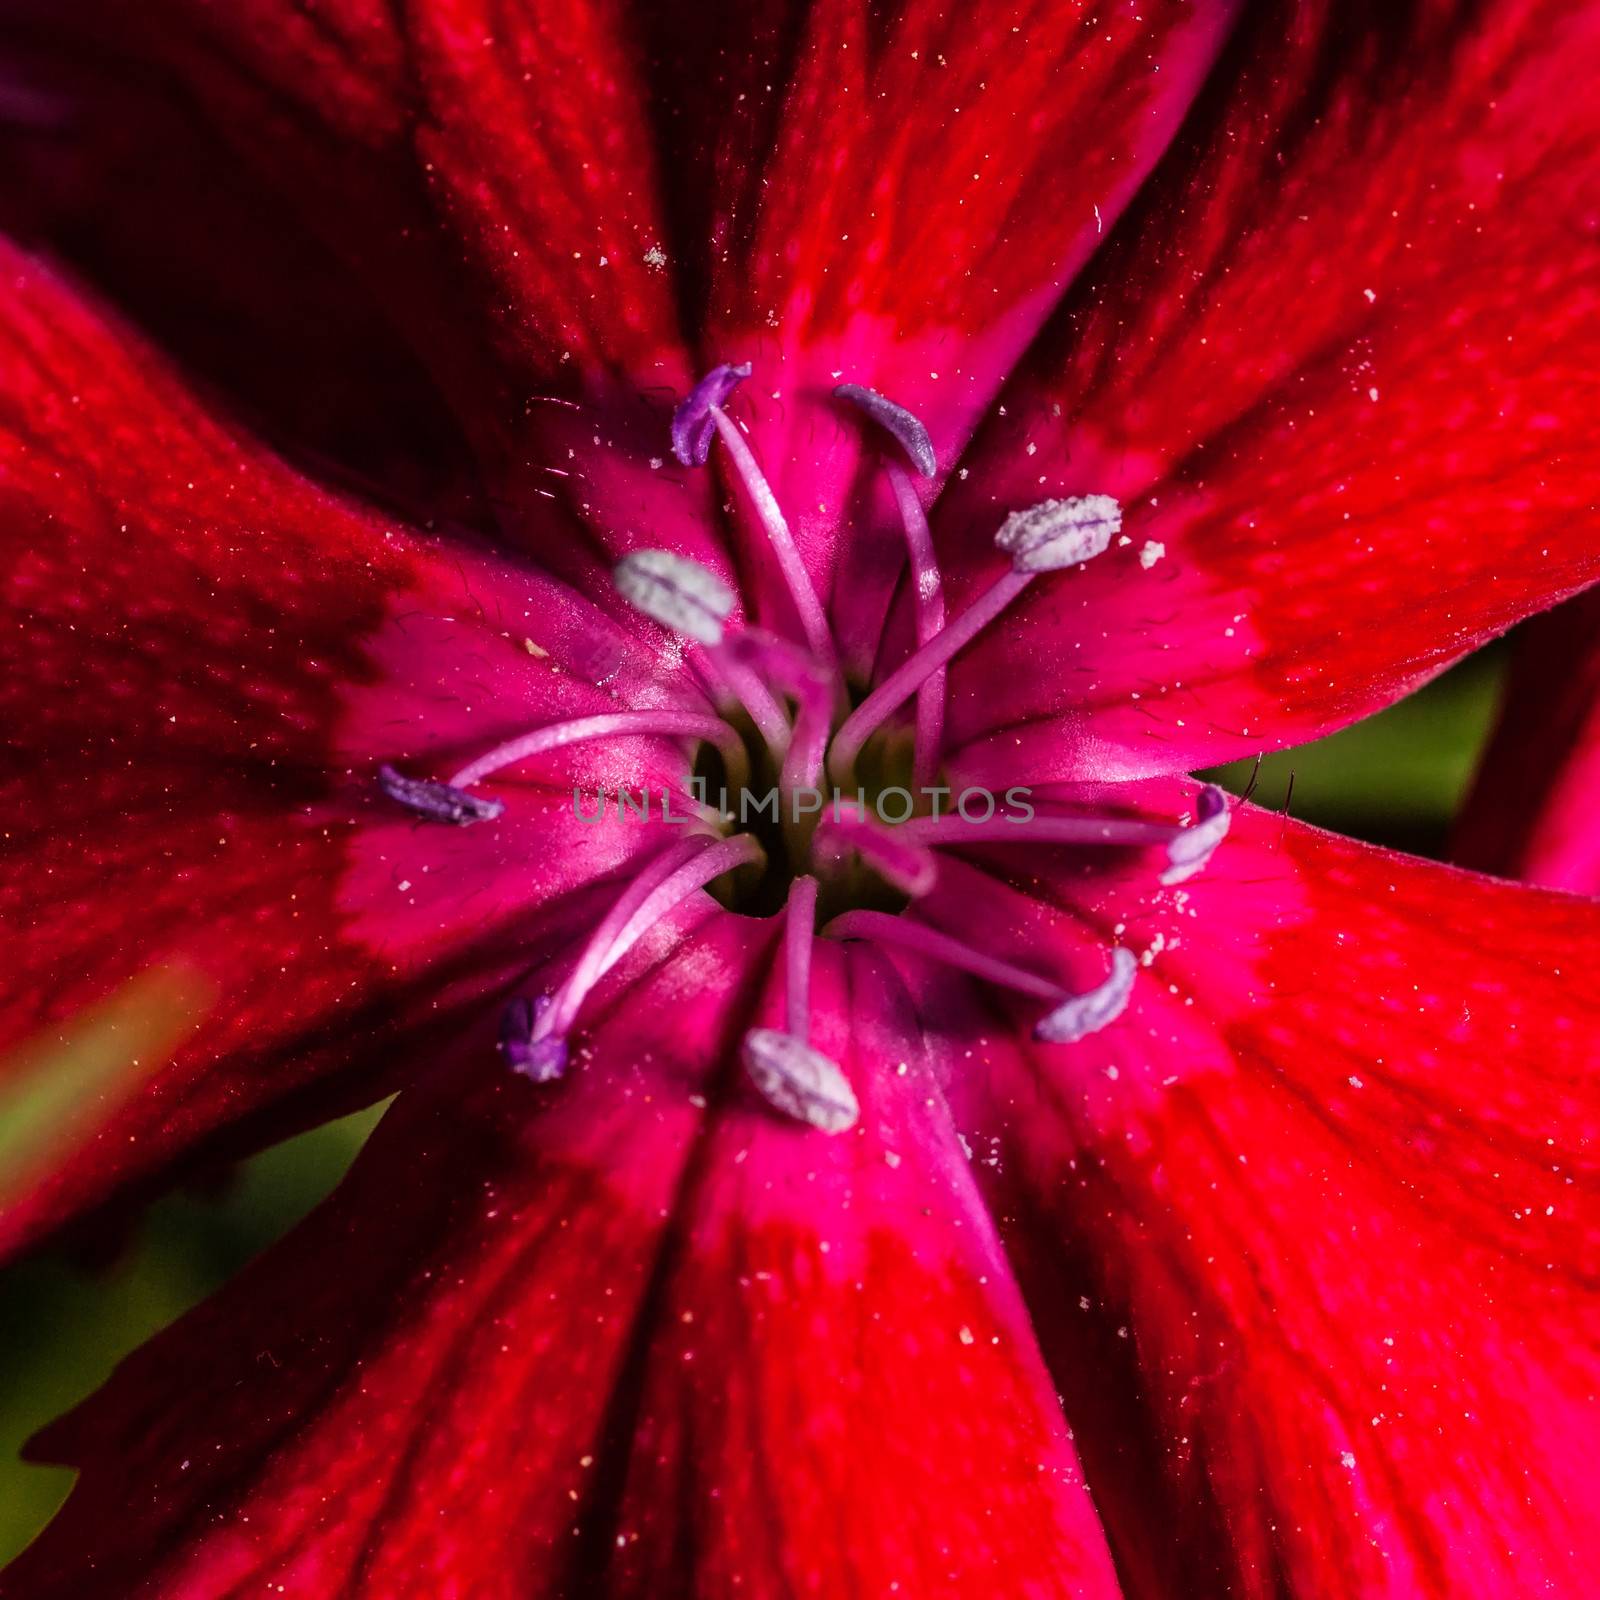 A super macro image showing detail of petals and pistils on a flower